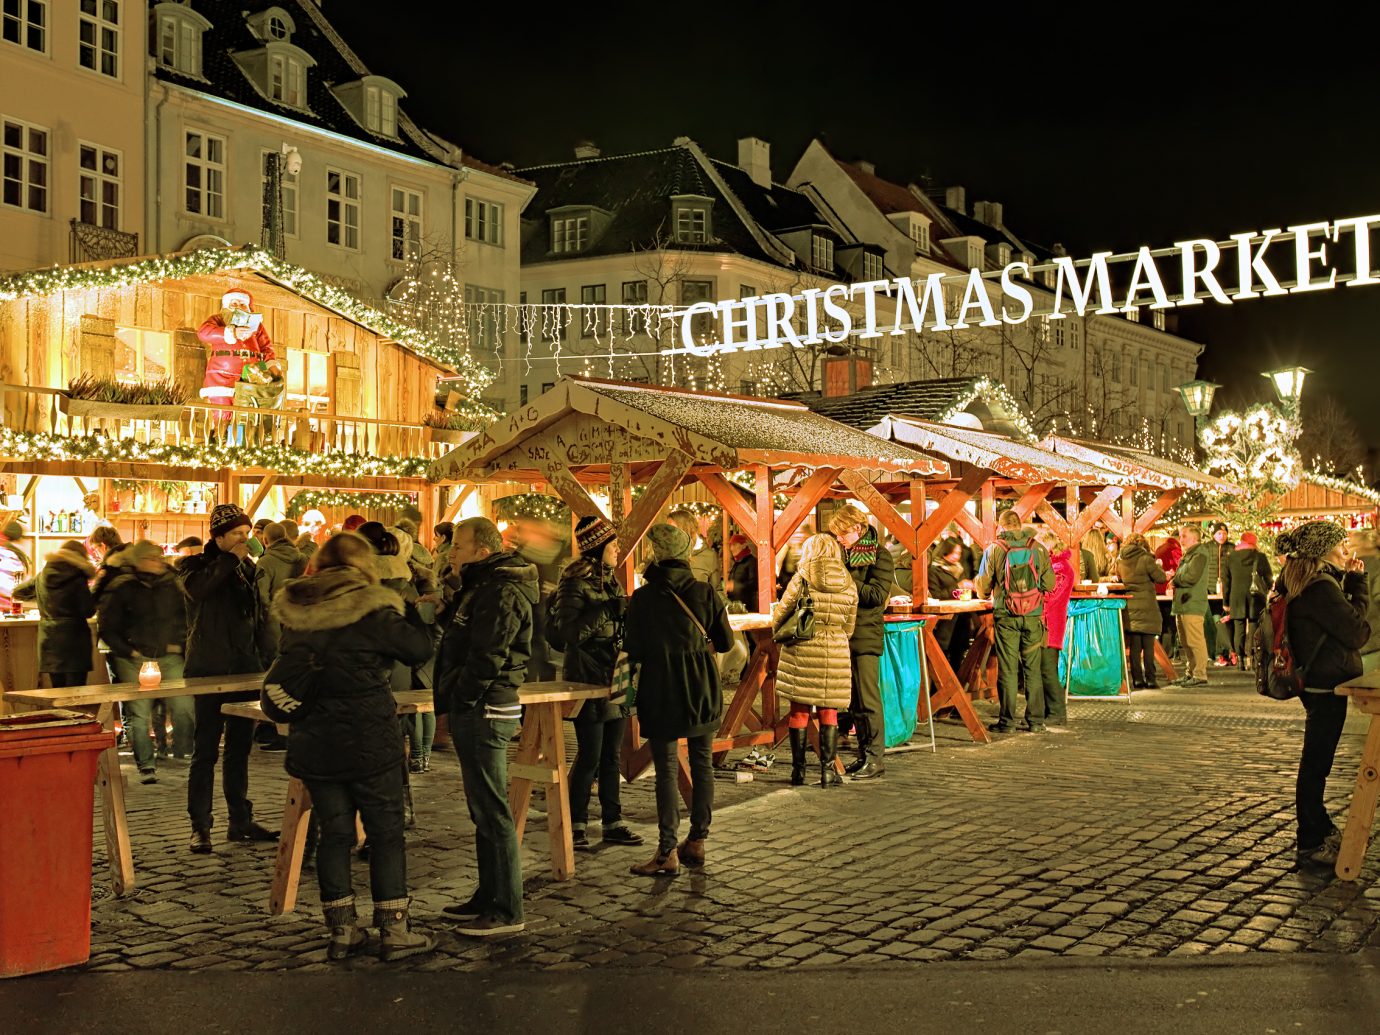 Deutsch’s Christmas Market on Hojbro Plads square. The organizer of the market is Michael Deutsch therefore it named Deutsch's Christmas Market.